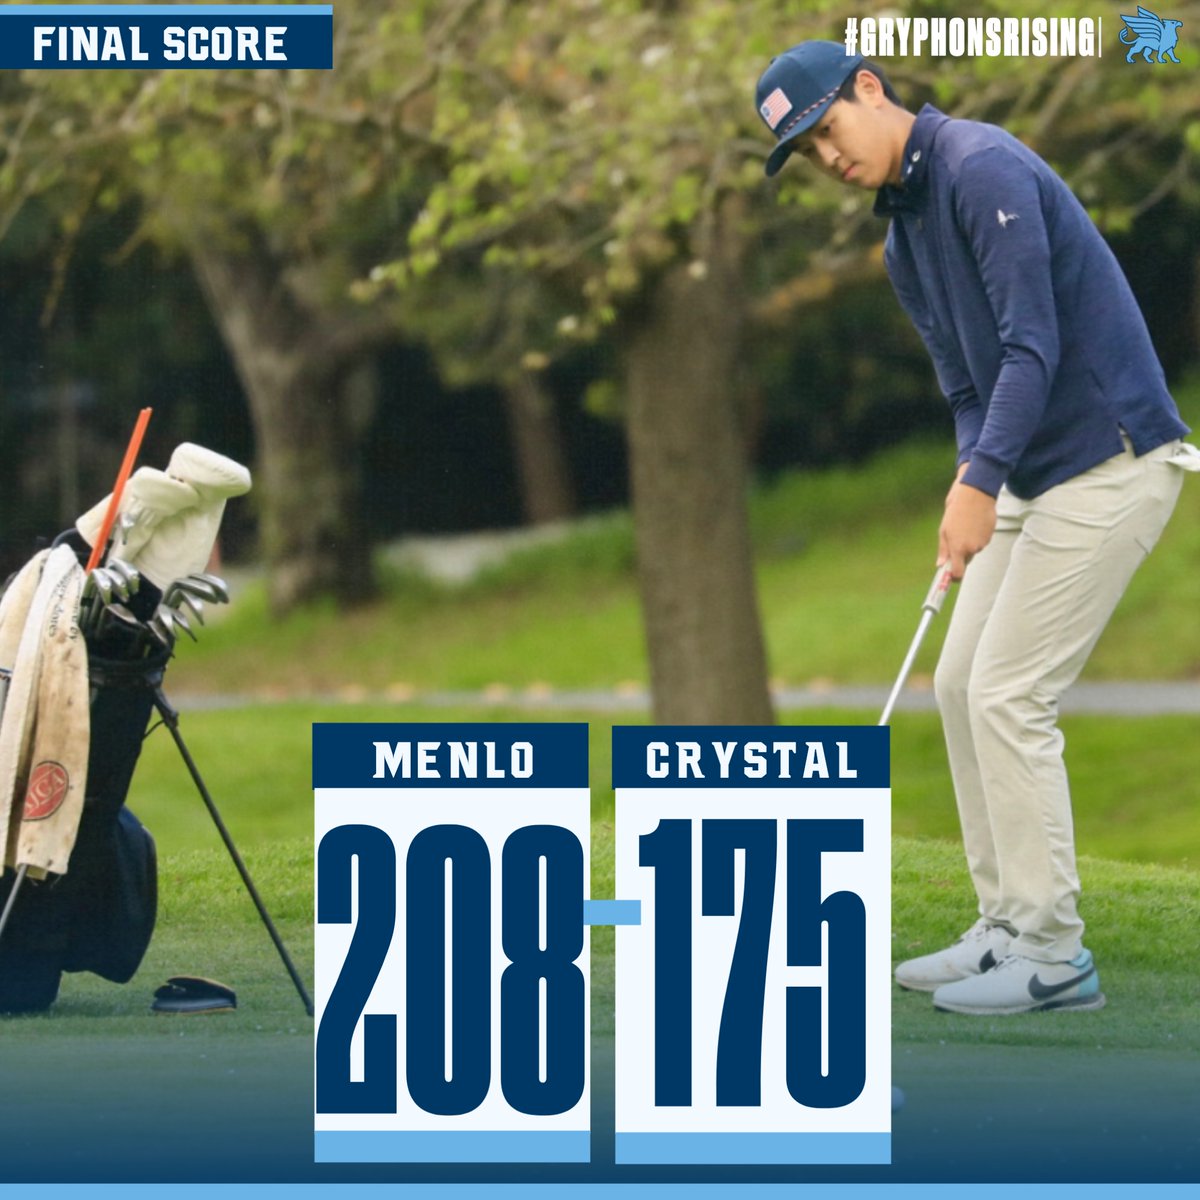 Crystal defeated Menlo School 175-208 with a school record TEN UNDER PAR at Baylands. Edan C and Griffin C both led the way with a -4 (33) each, Philip H and Arden X shot -1 (36), and both Henry C and Ethan L shot even par 37.